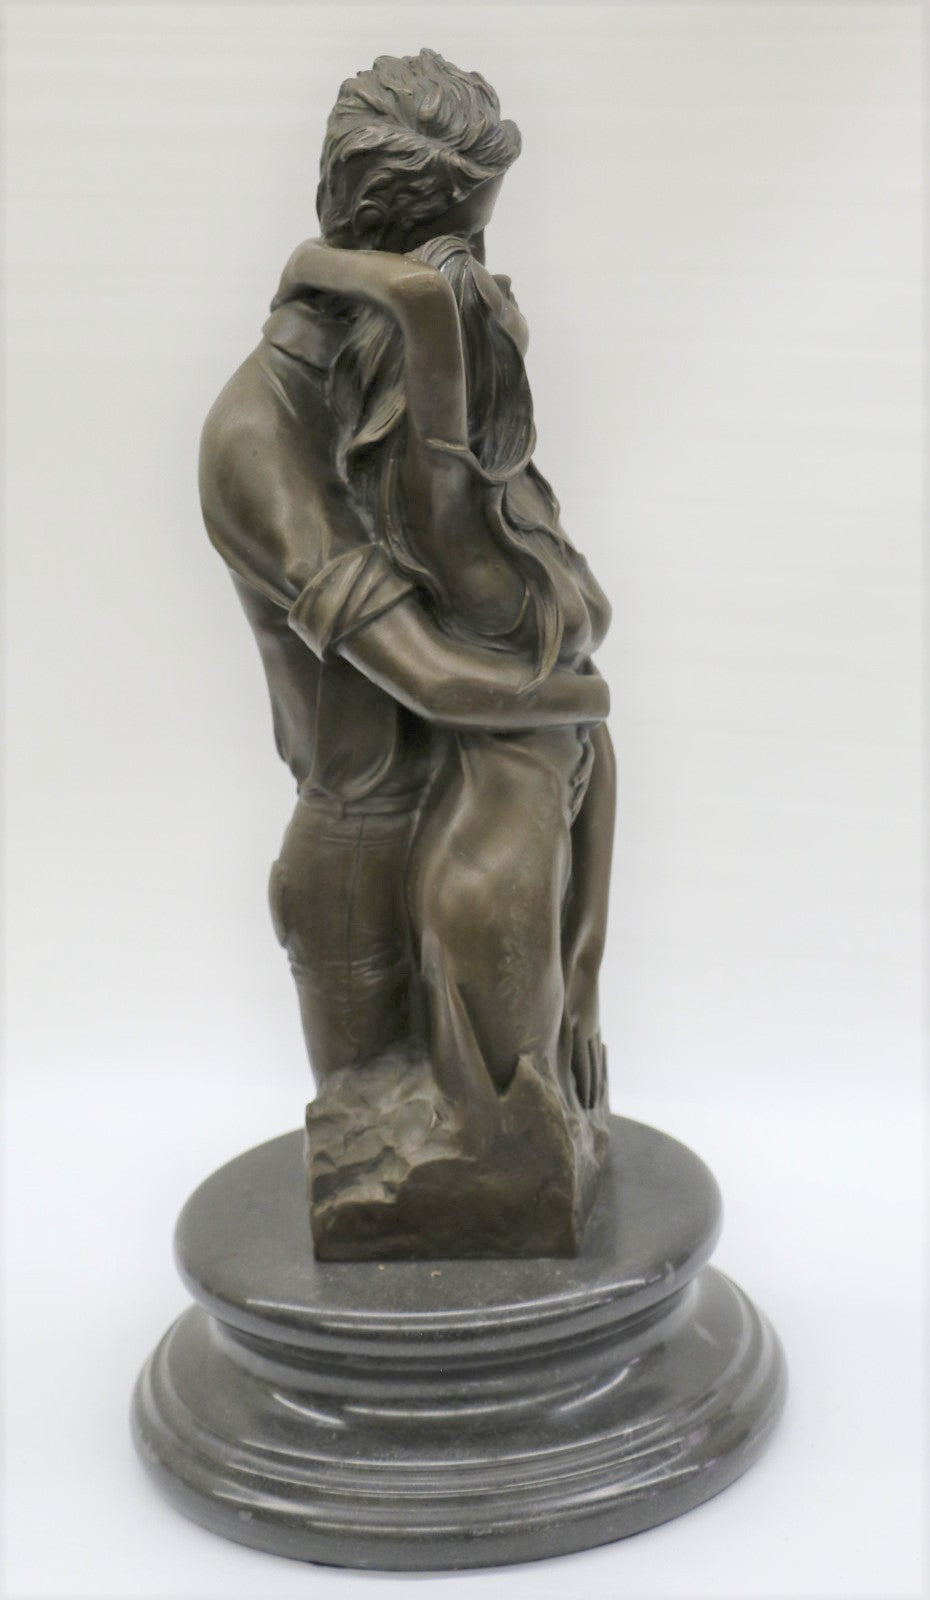 Bronze sculpture of a couple's tender embrace portrays the power of intimacy